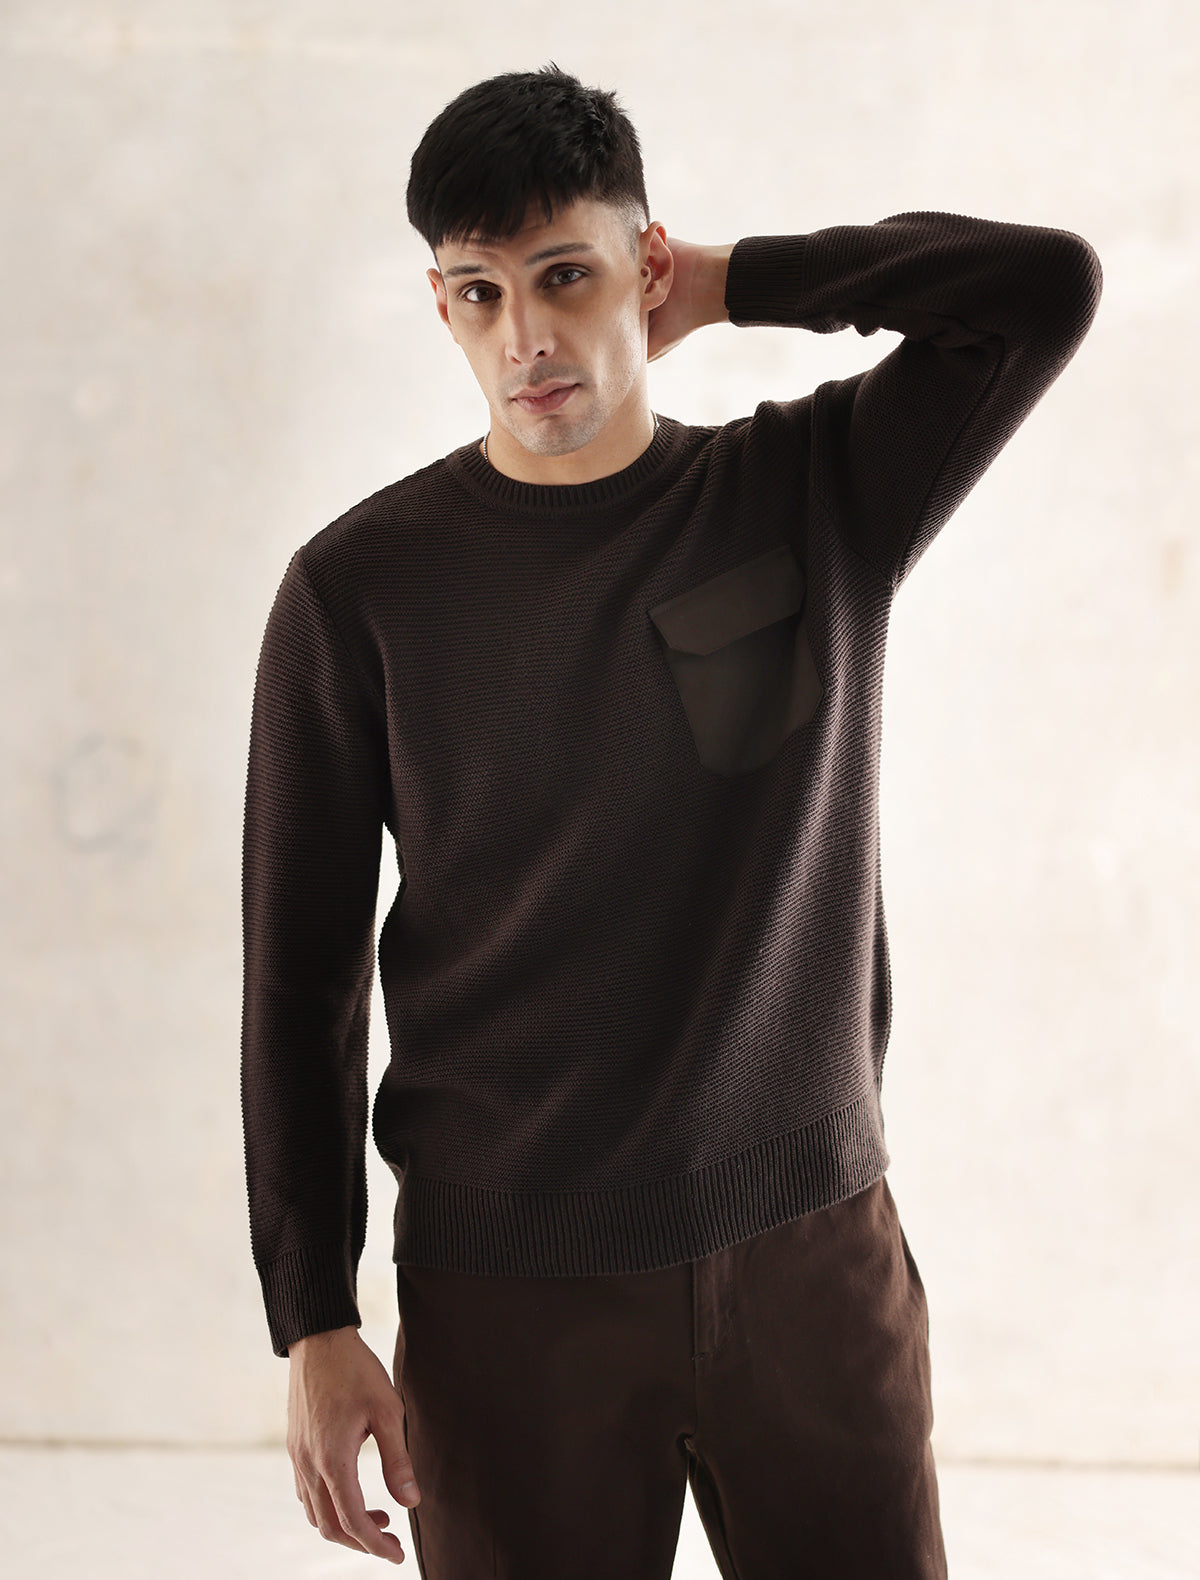 BROWN FULL SLEEVE ARMY STYLE SWEATER